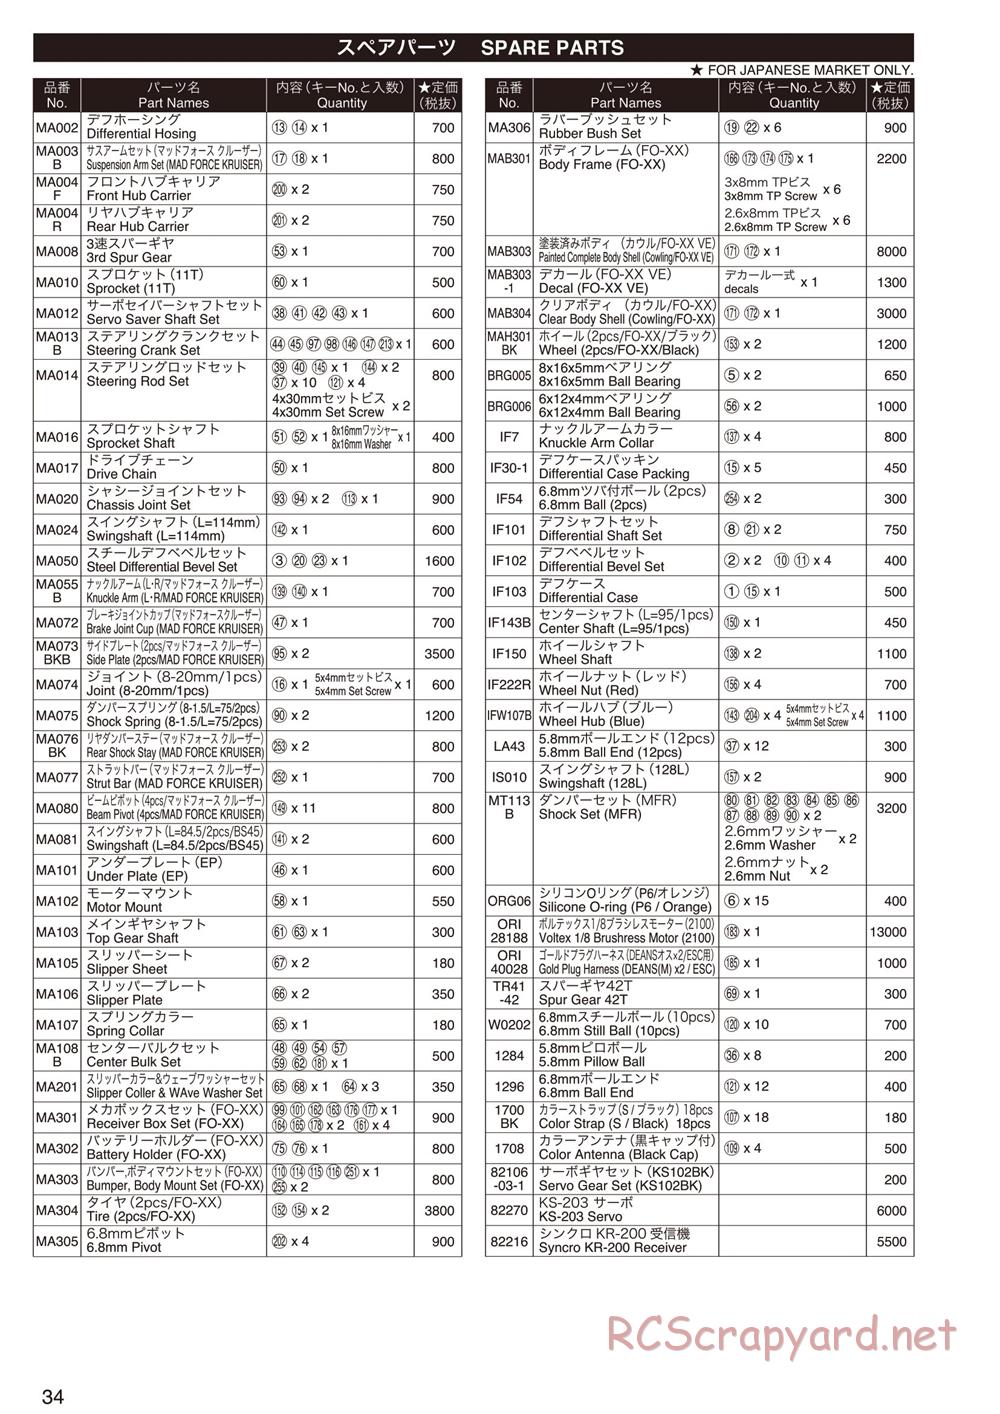 Kyosho - FO-XX VE - Parts List - Page 1